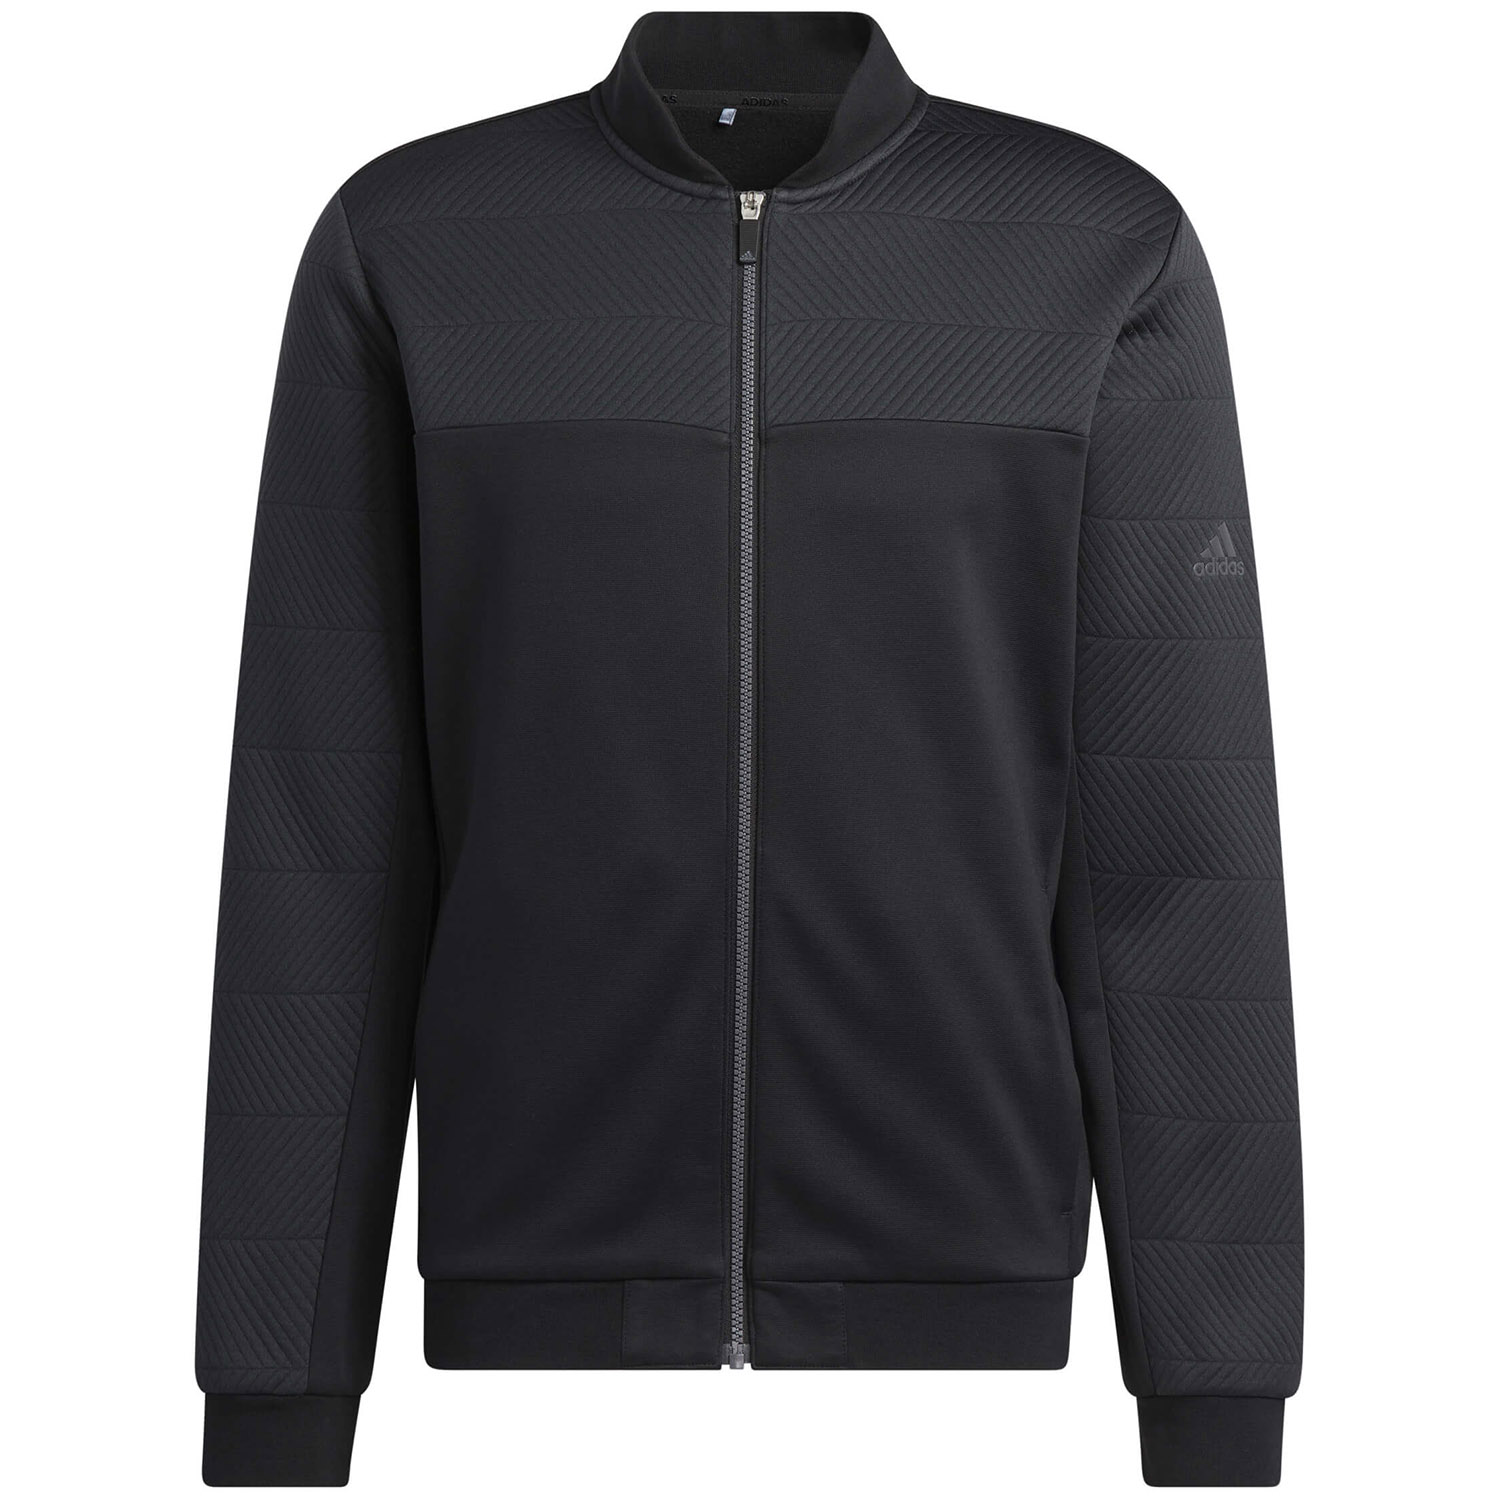 adidas COLD.RDY Full Zip Jacket